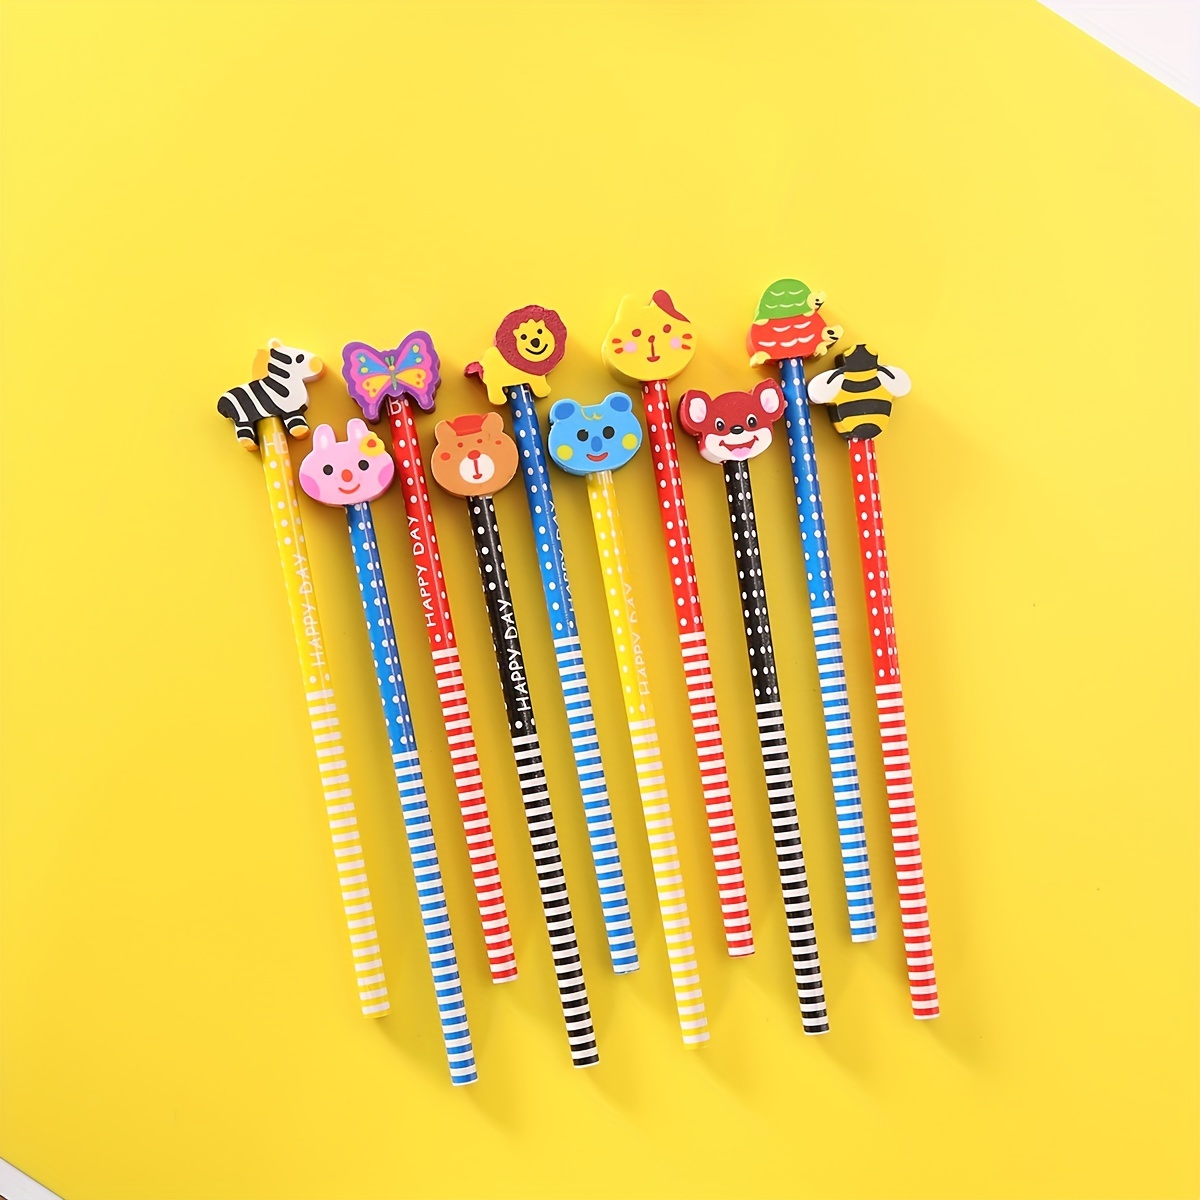 

10pcs Students Prizes Hb Pencil Students' Learning Supplies Gifts Creative Cute Cartoon With Eraser Classroom Reward Gifts